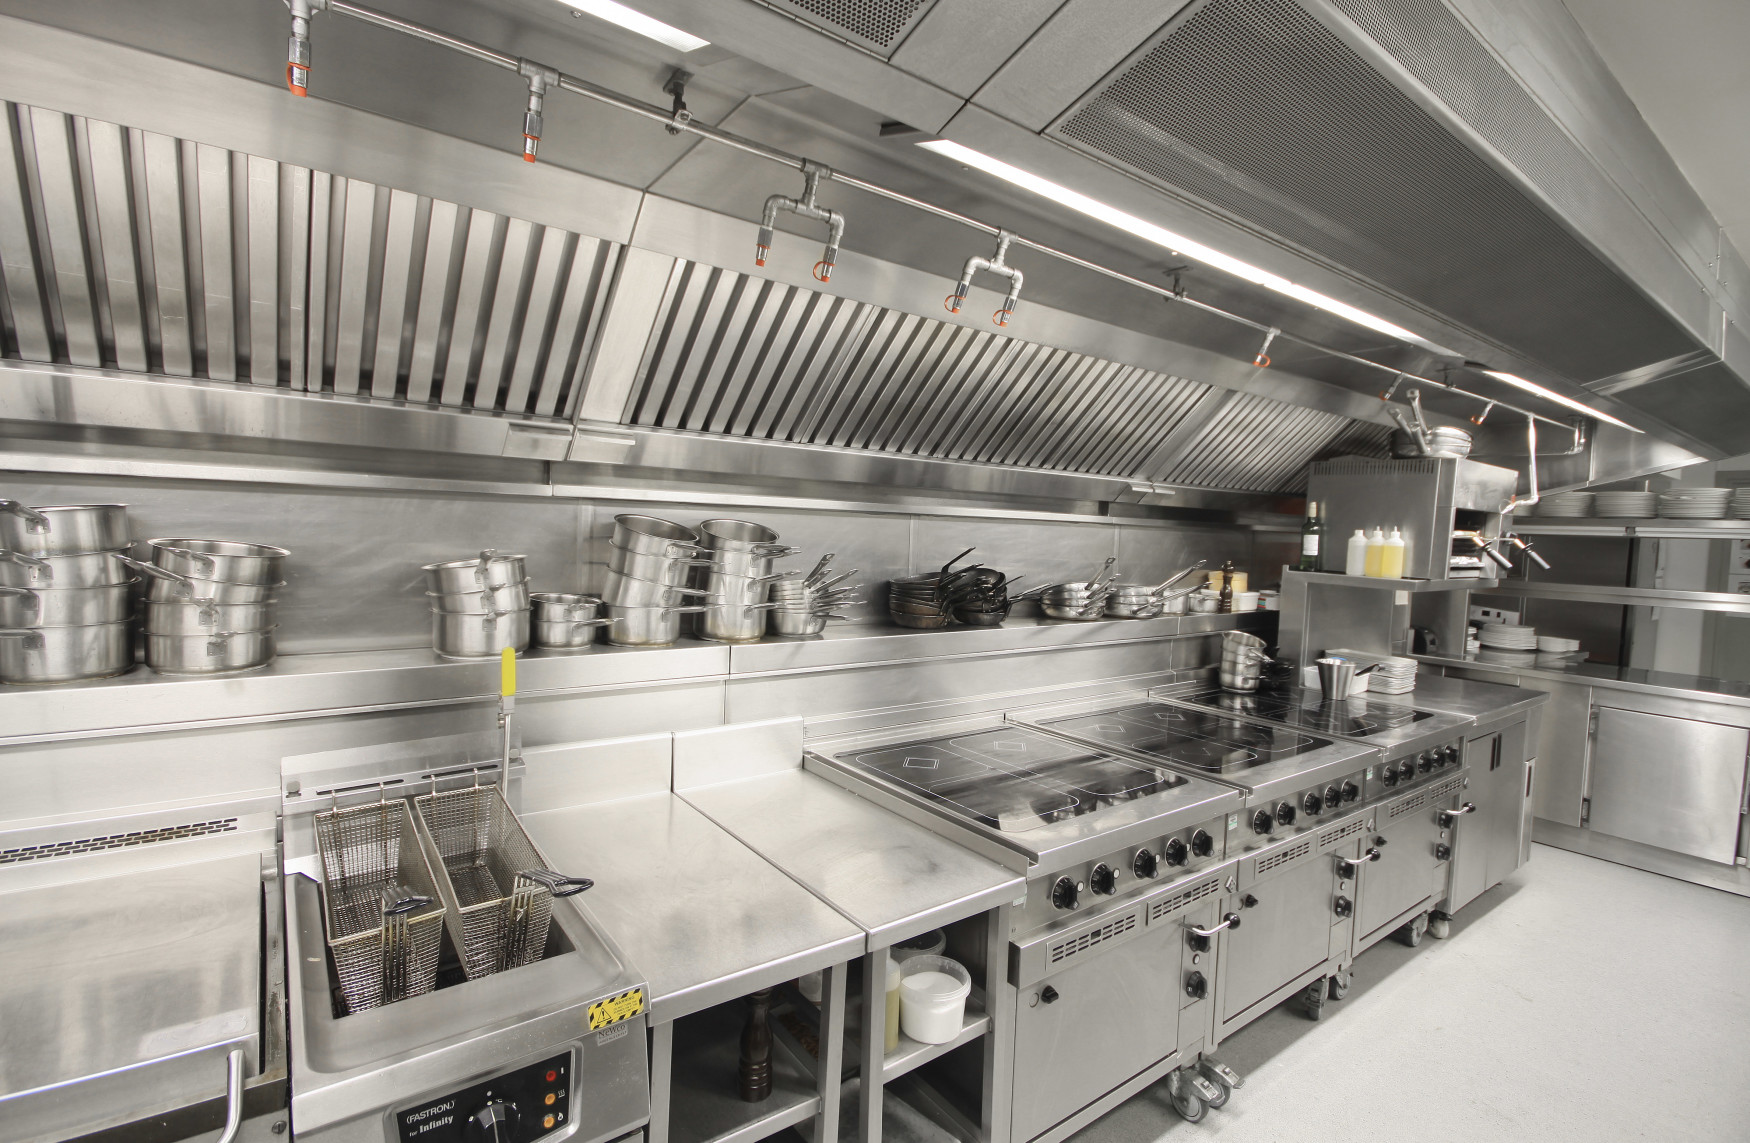 Kitchen Exhaust Hood Cleaning - A-1 Cleaning Service, LLC.